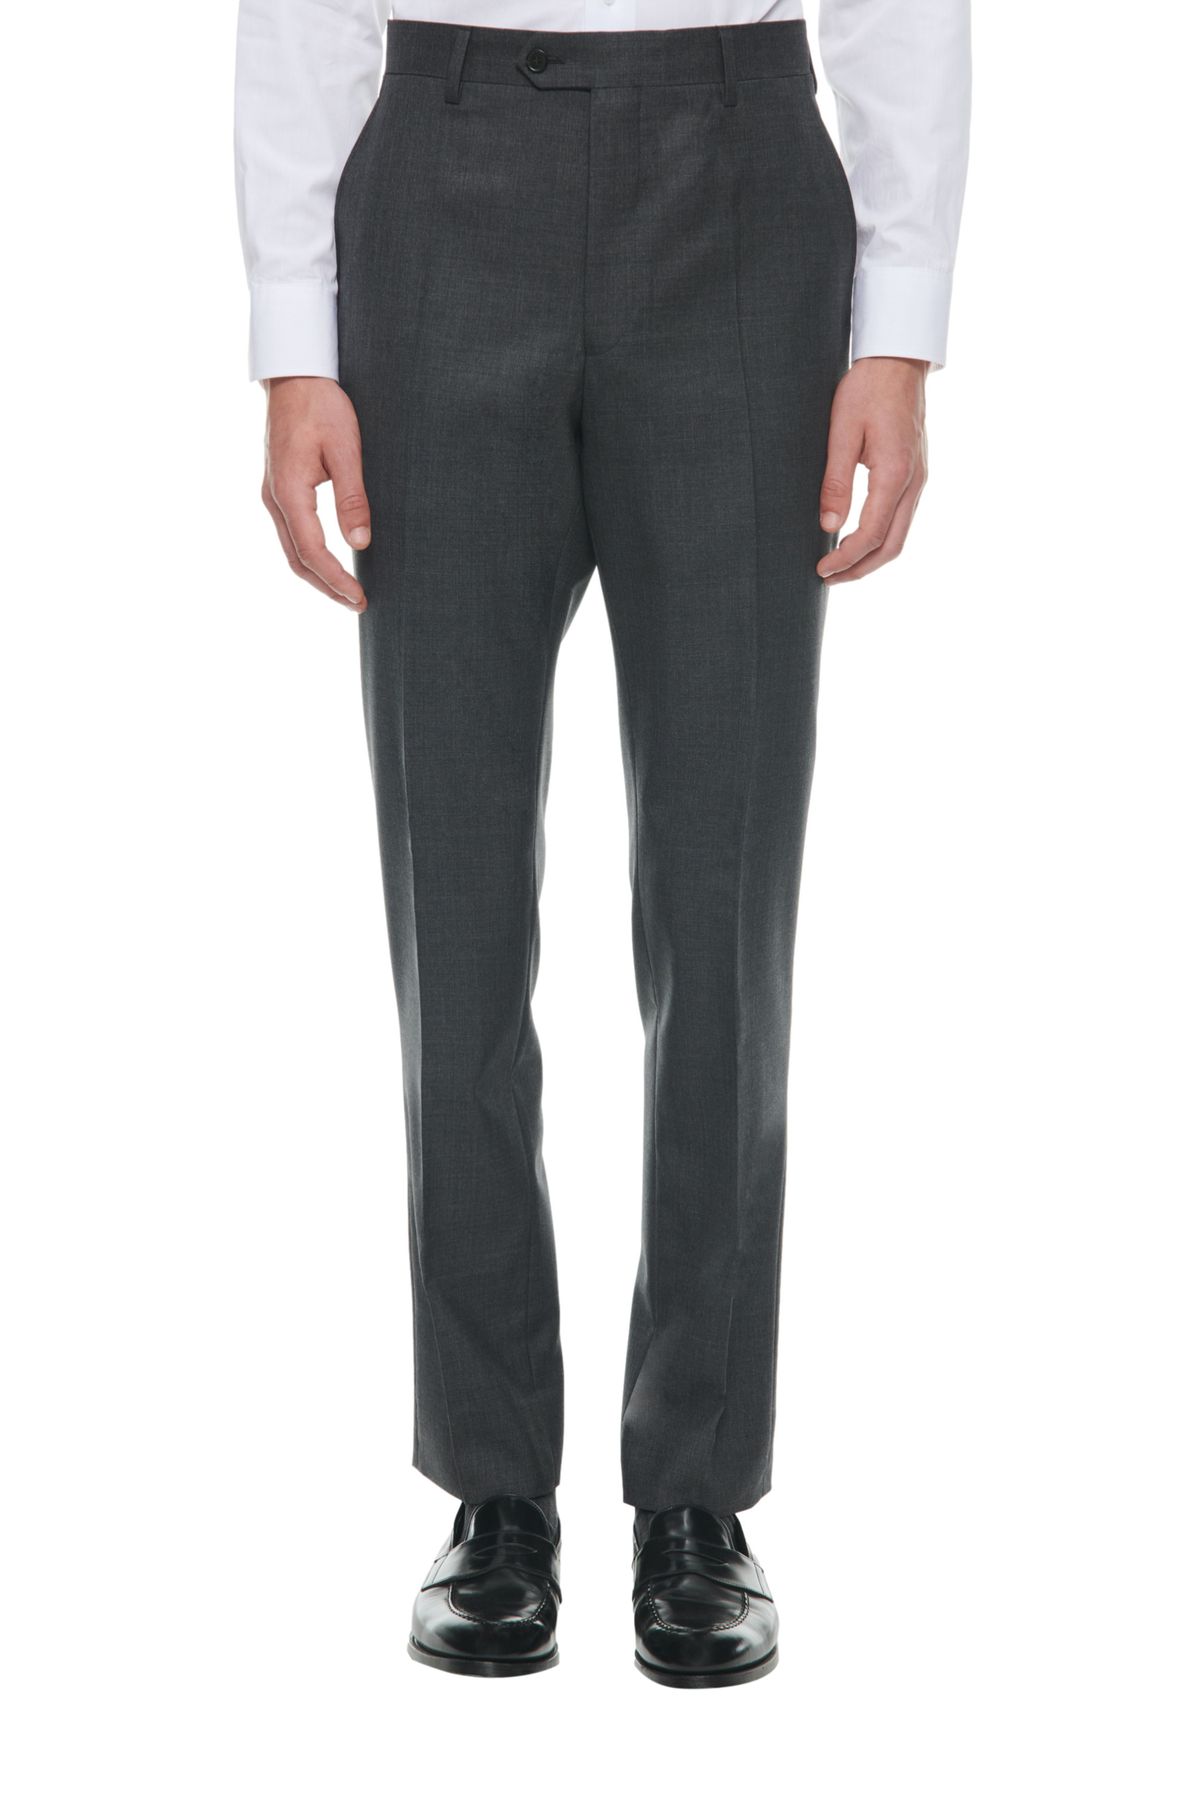  End-on-end virgin wool fitted suit